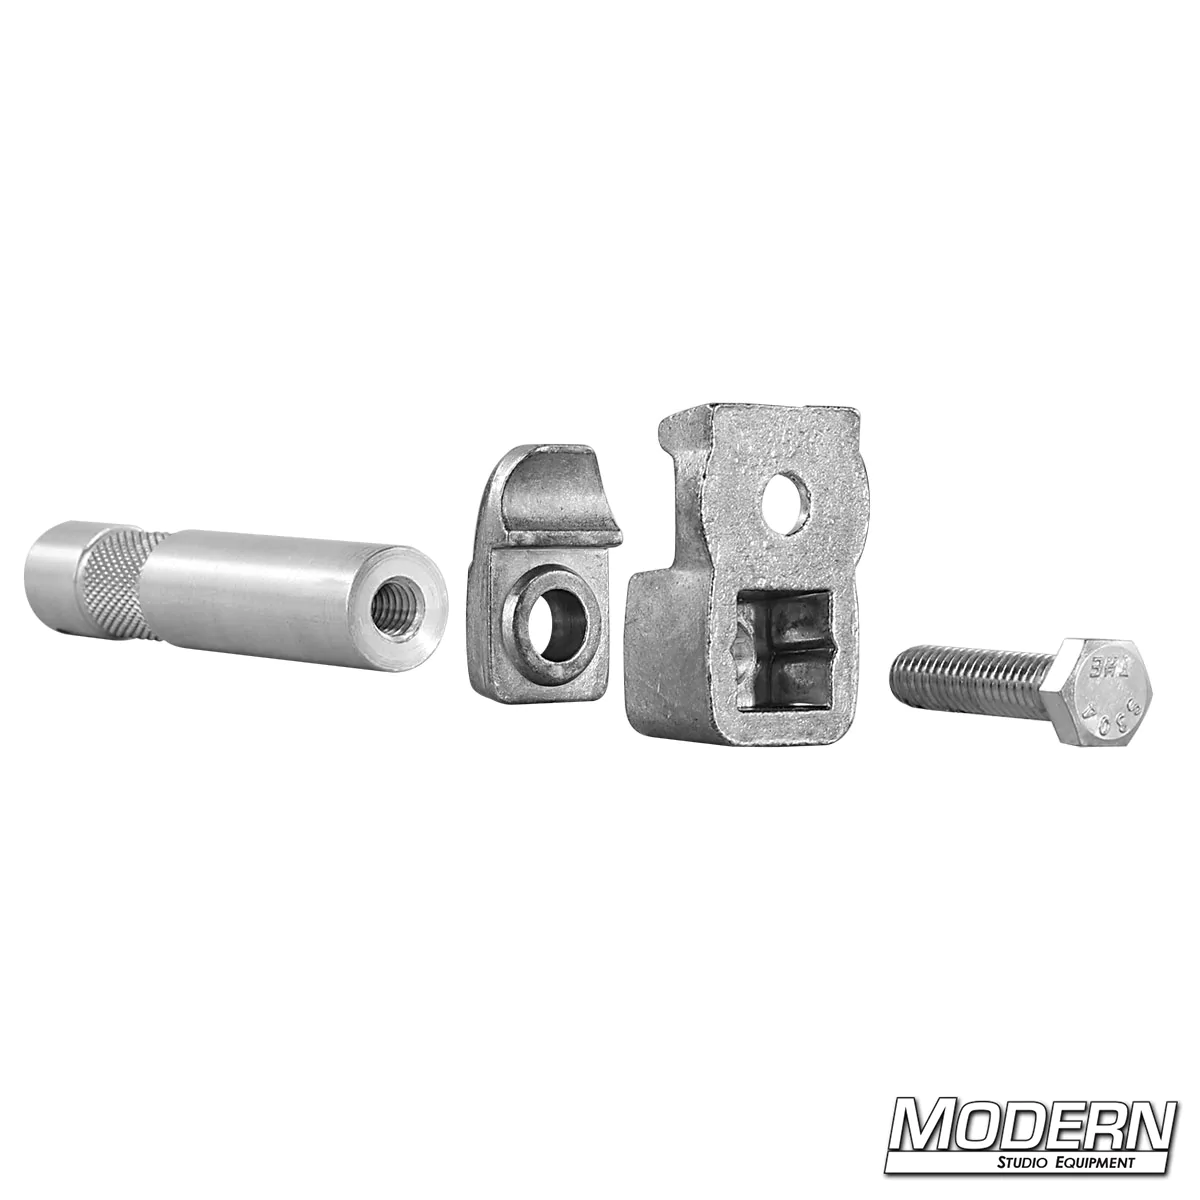 5/8-inch Rod Clamp with Baby Pin